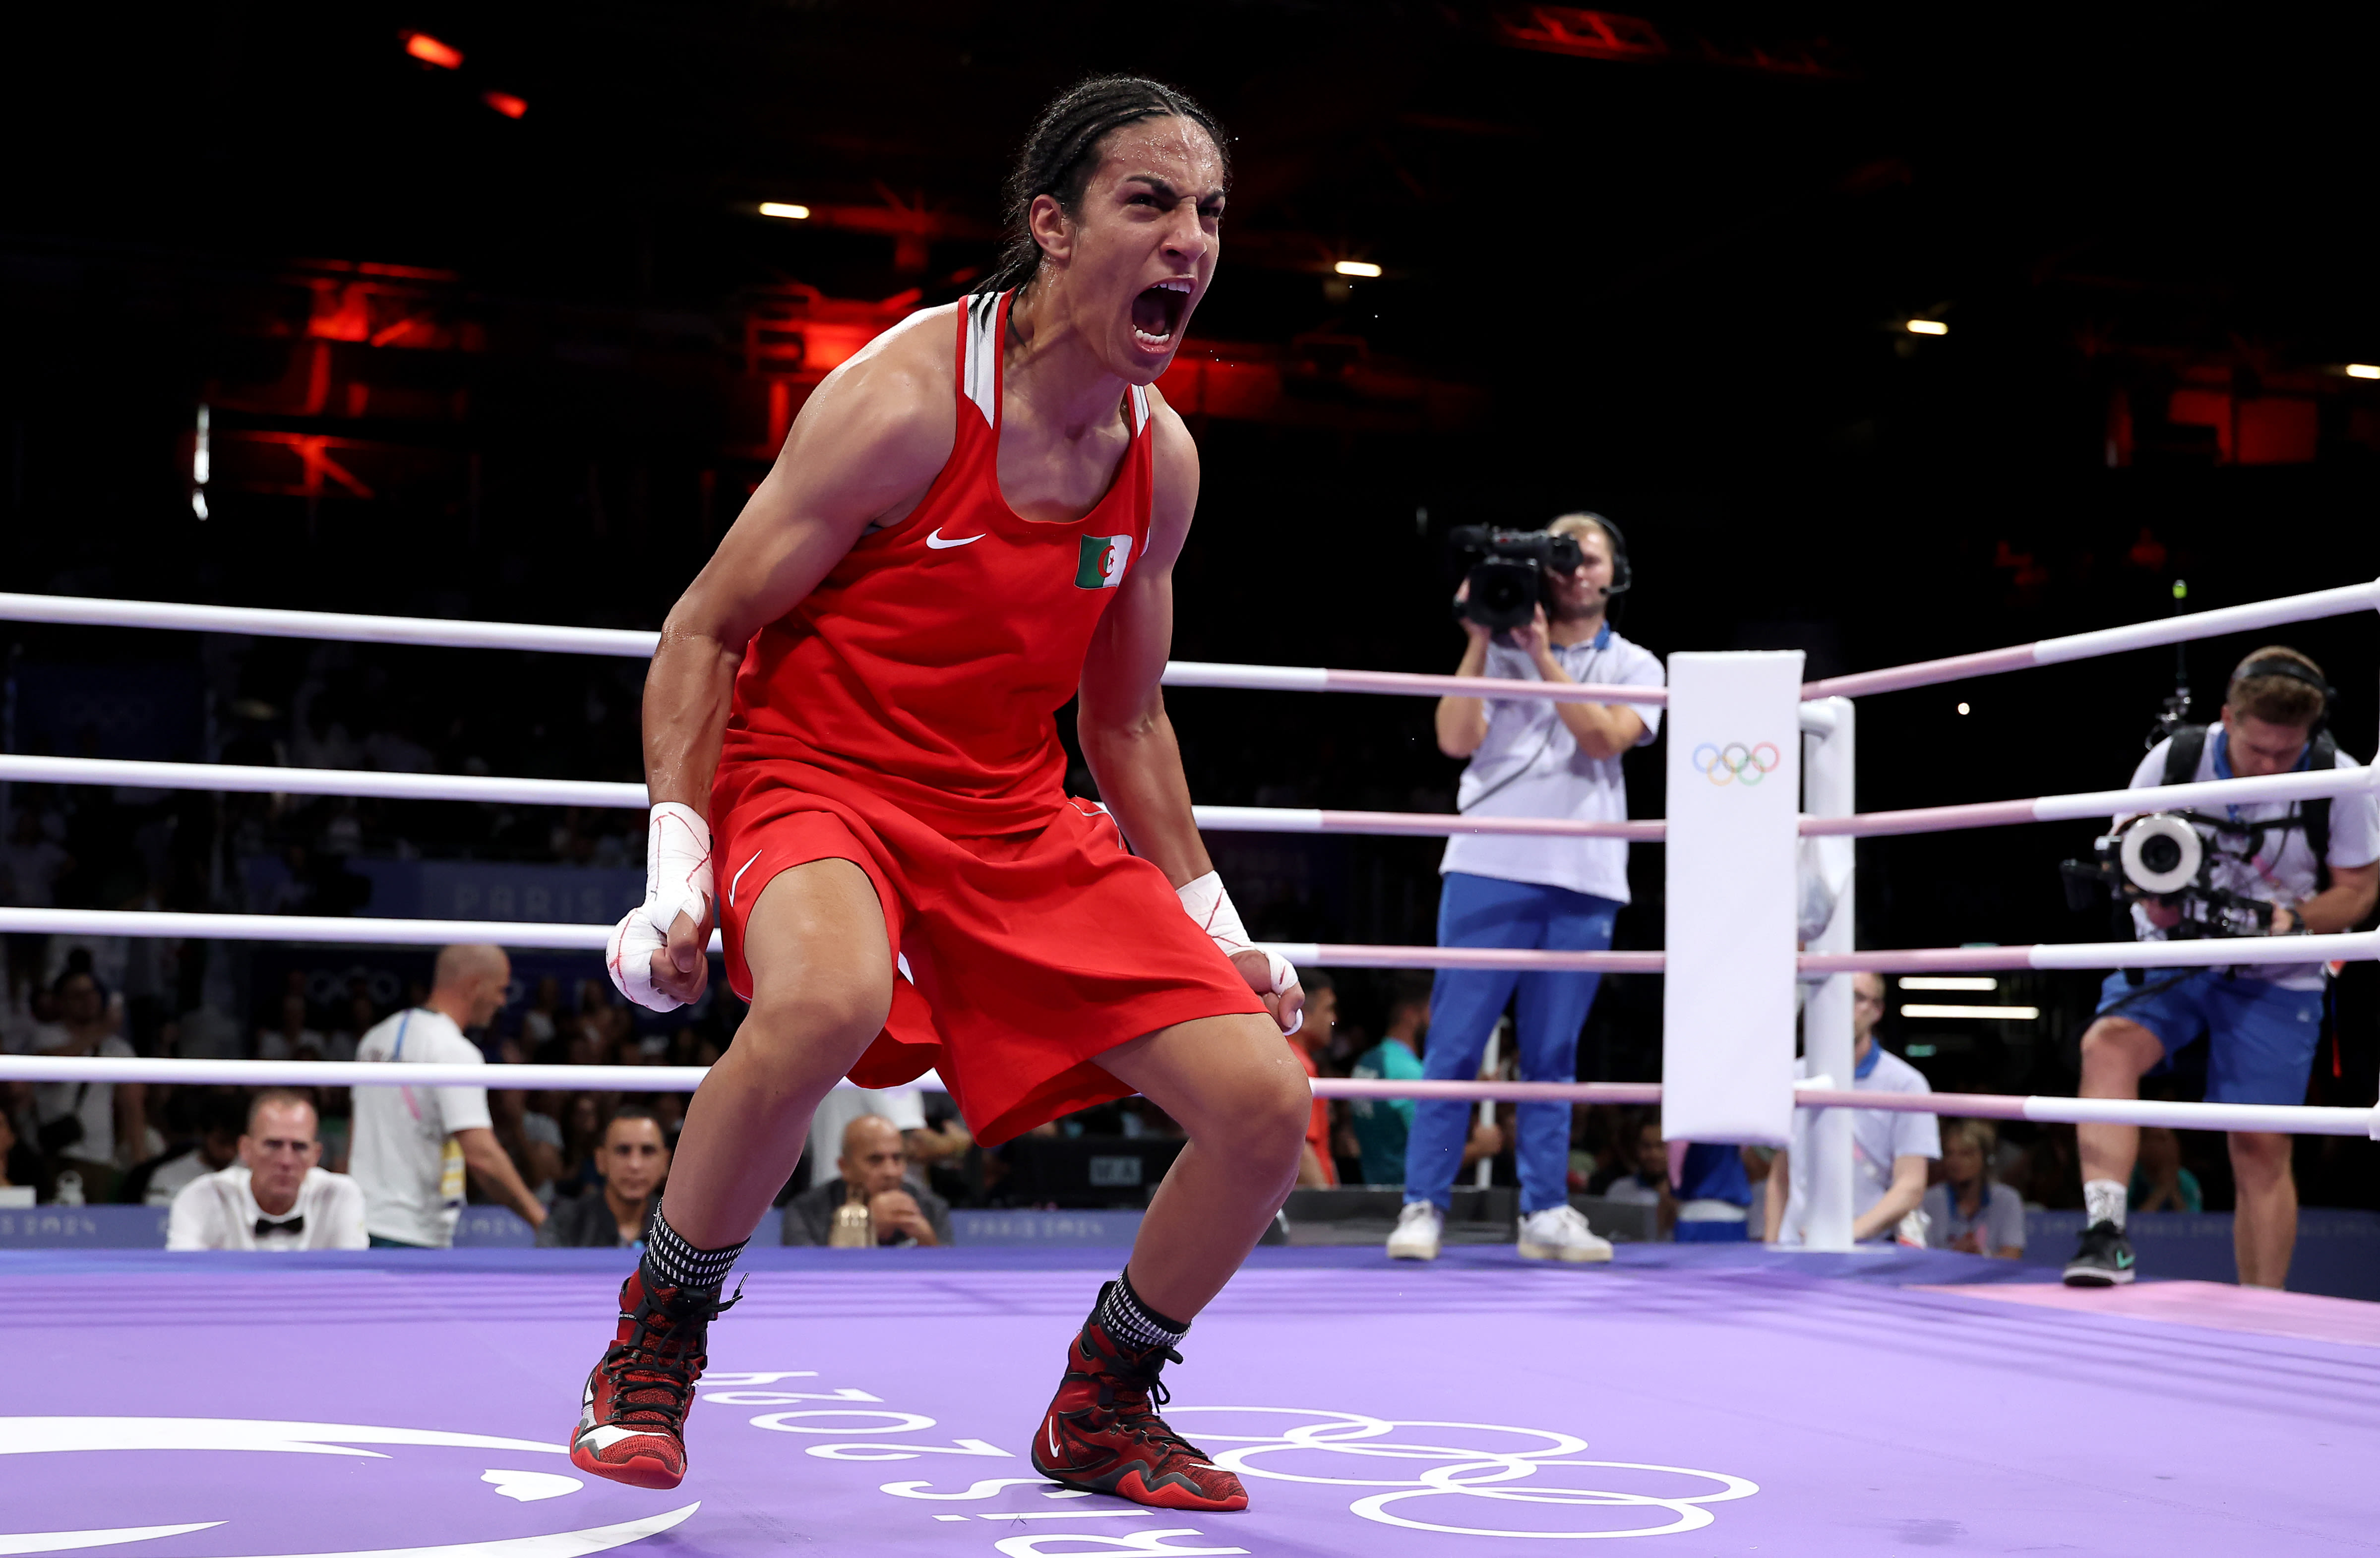 Algerian Boxer Imane Khelif Wins Olympic Women’s Boxing Quarterfinal As Gender Row Continues To Rage